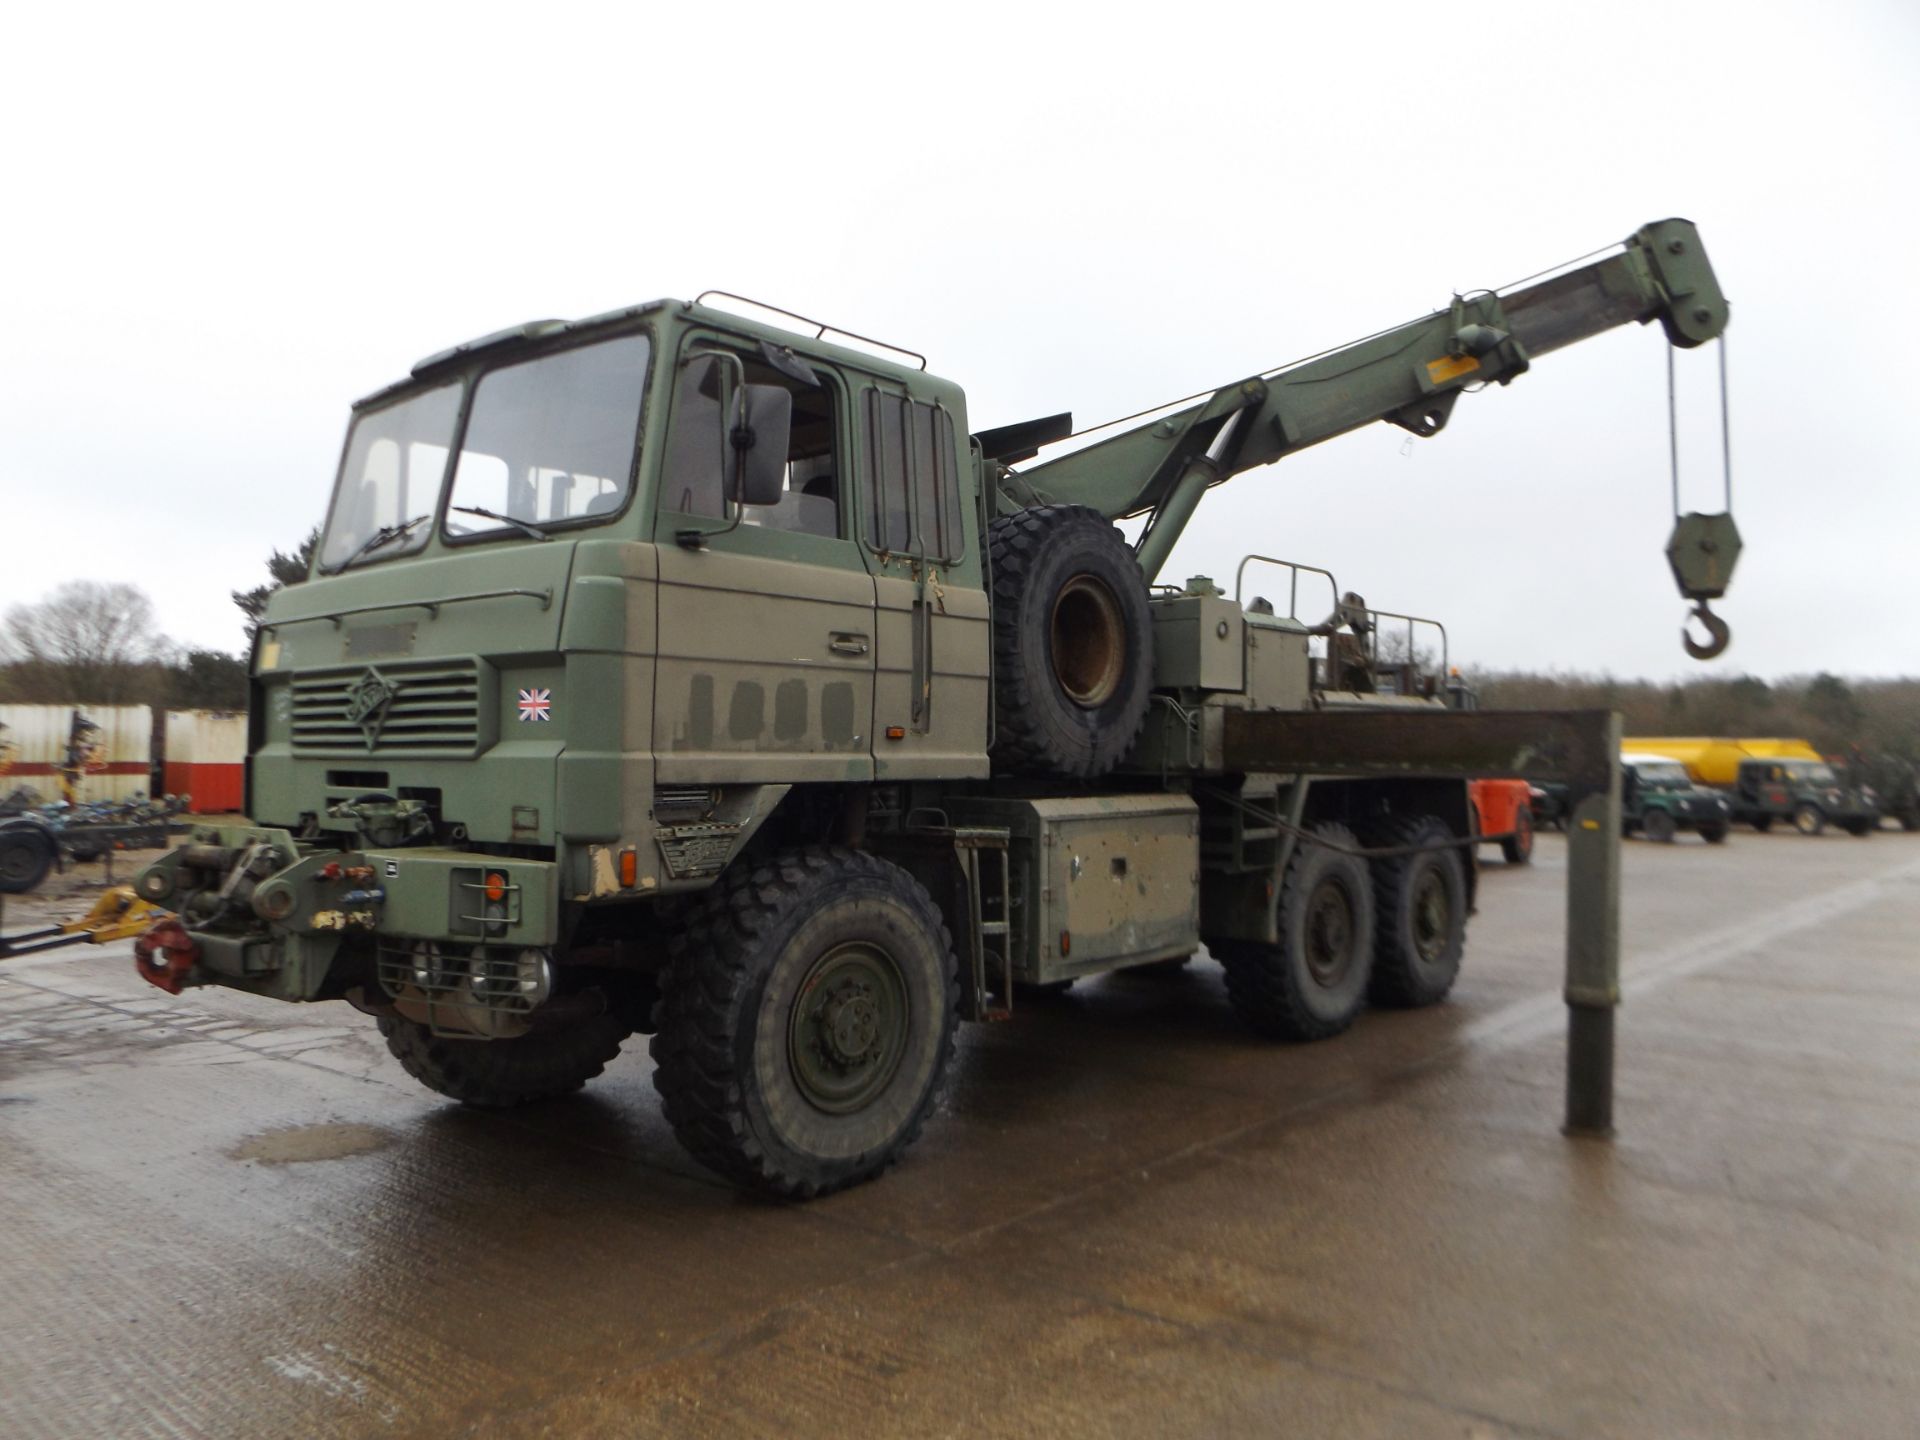 Foden 6x6 Recovery Vehicle which is Complete with a Remote and some EKA Recovery Tools